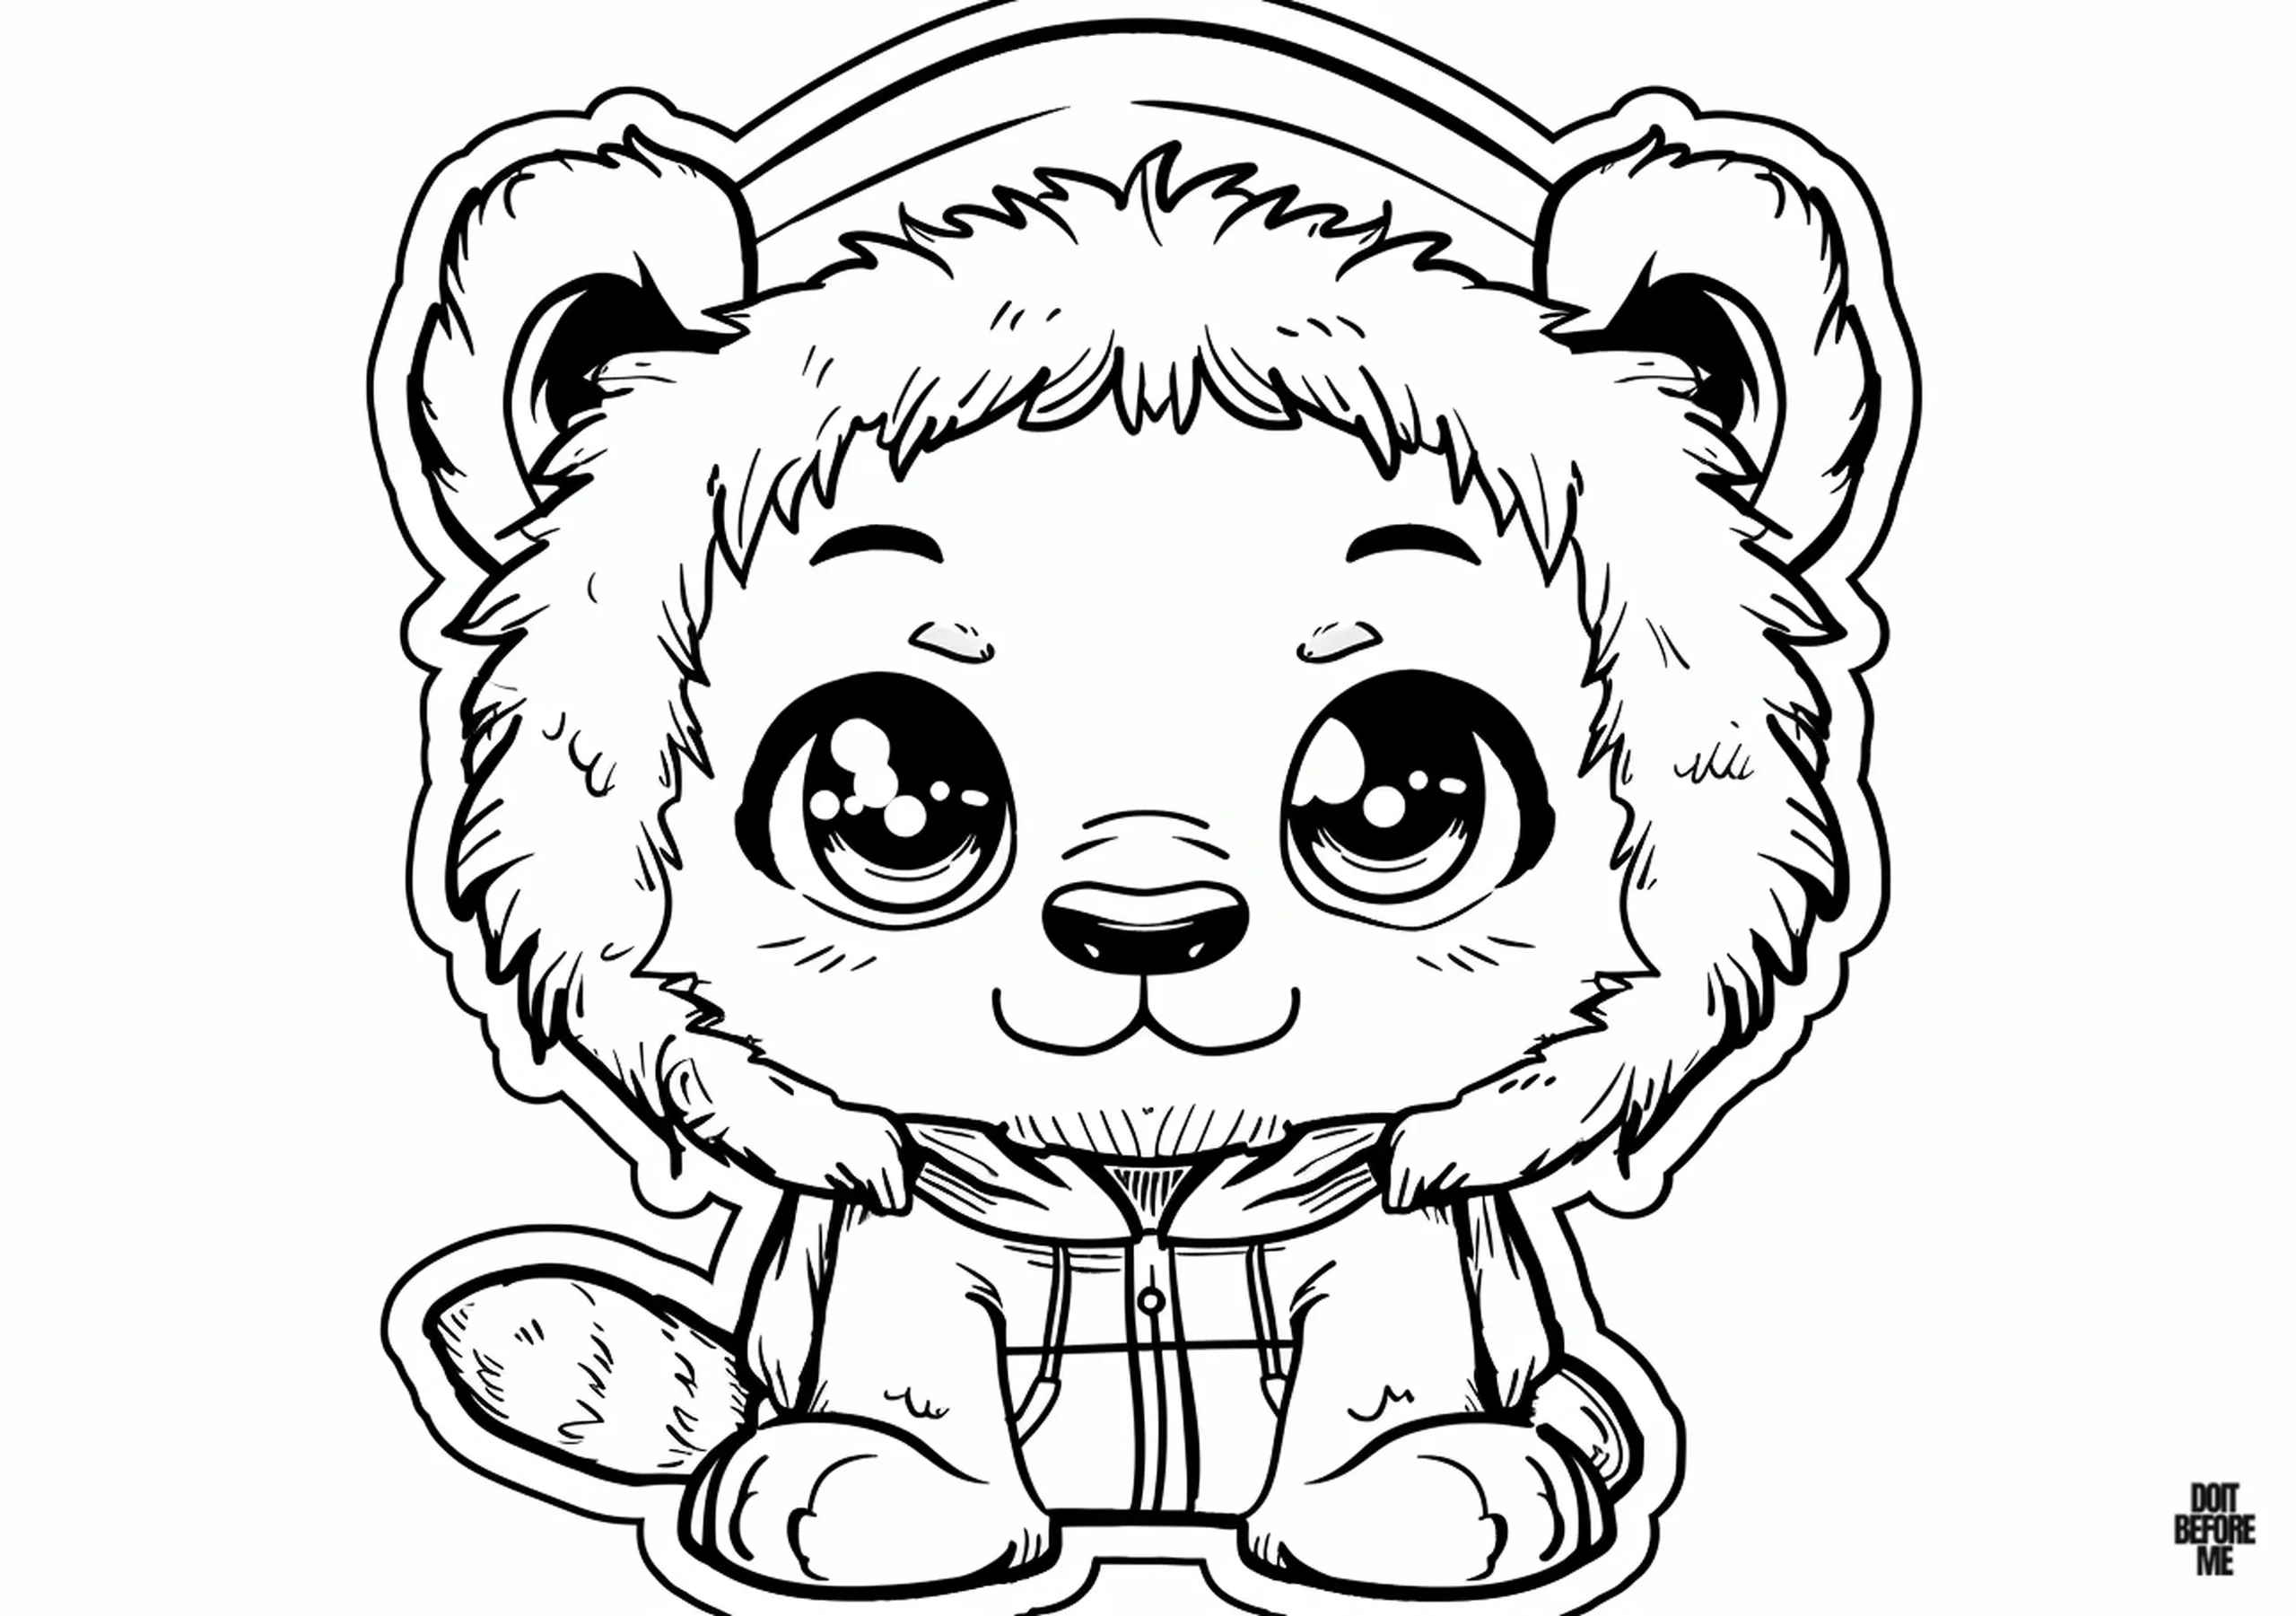 Free printable cute lion cub colouring page featuring large, adorable kawaii eyes and dressed in a cozy hoodie for the winter season.